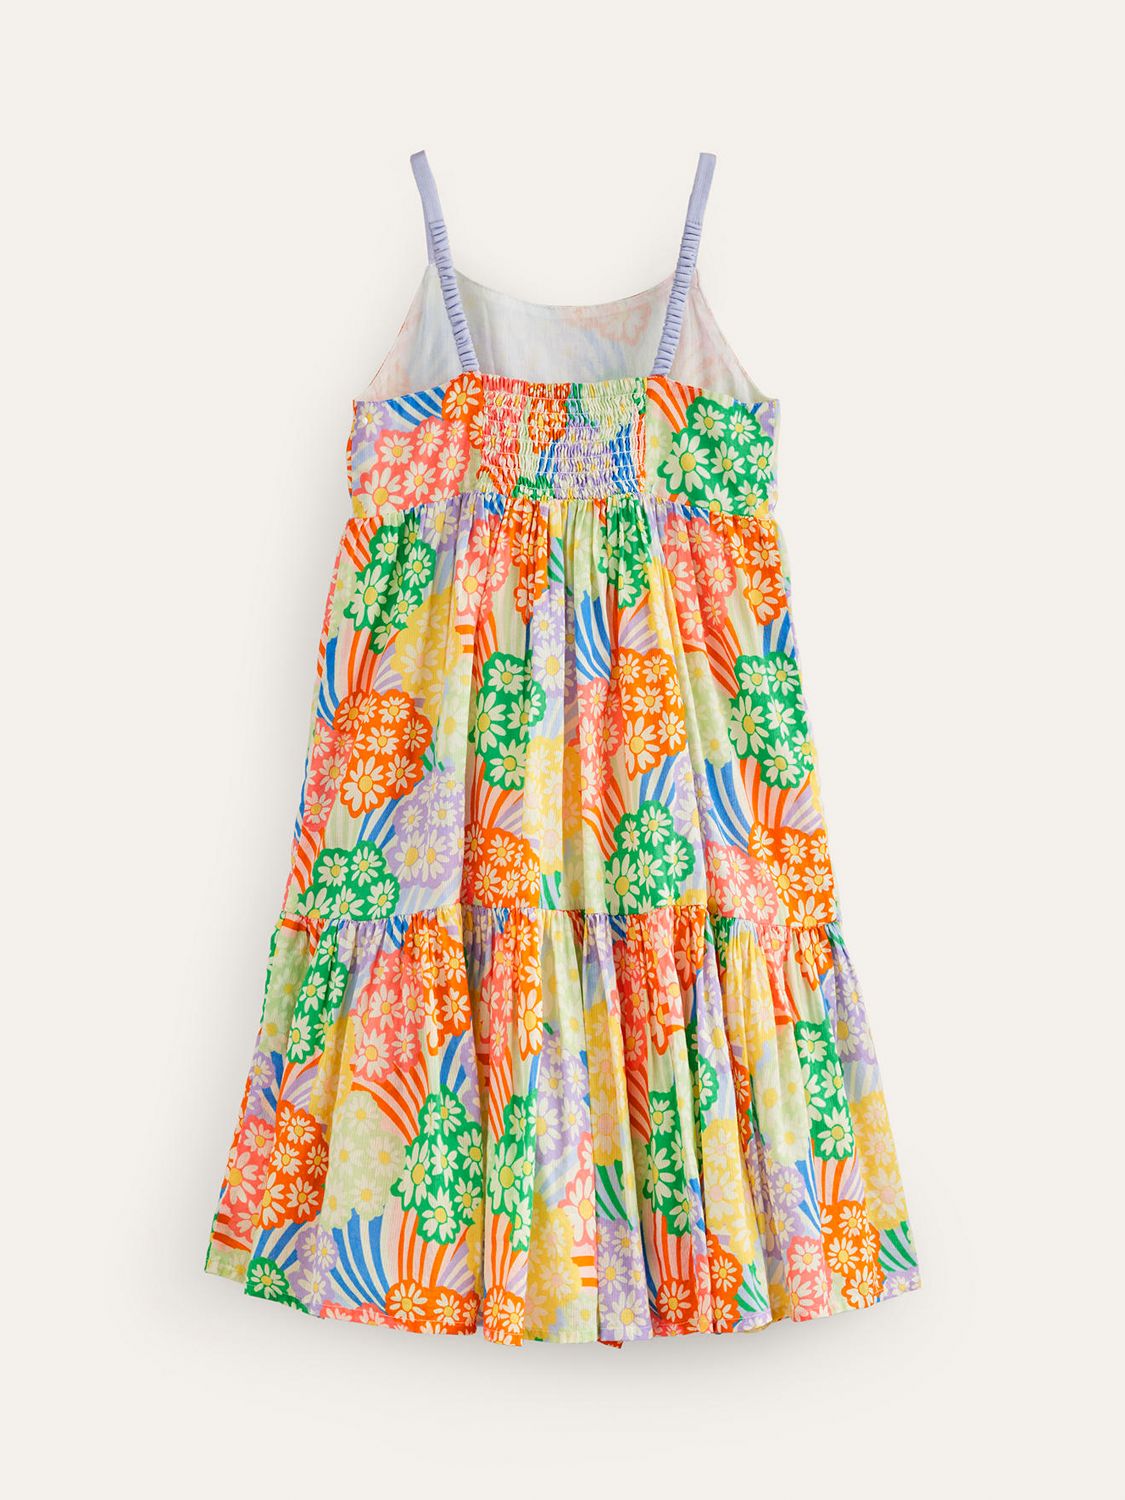 Buy Mini Boden Kids' Floral Twirly Tiered Sun Dress, Rainbow Daisies Online at johnlewis.com